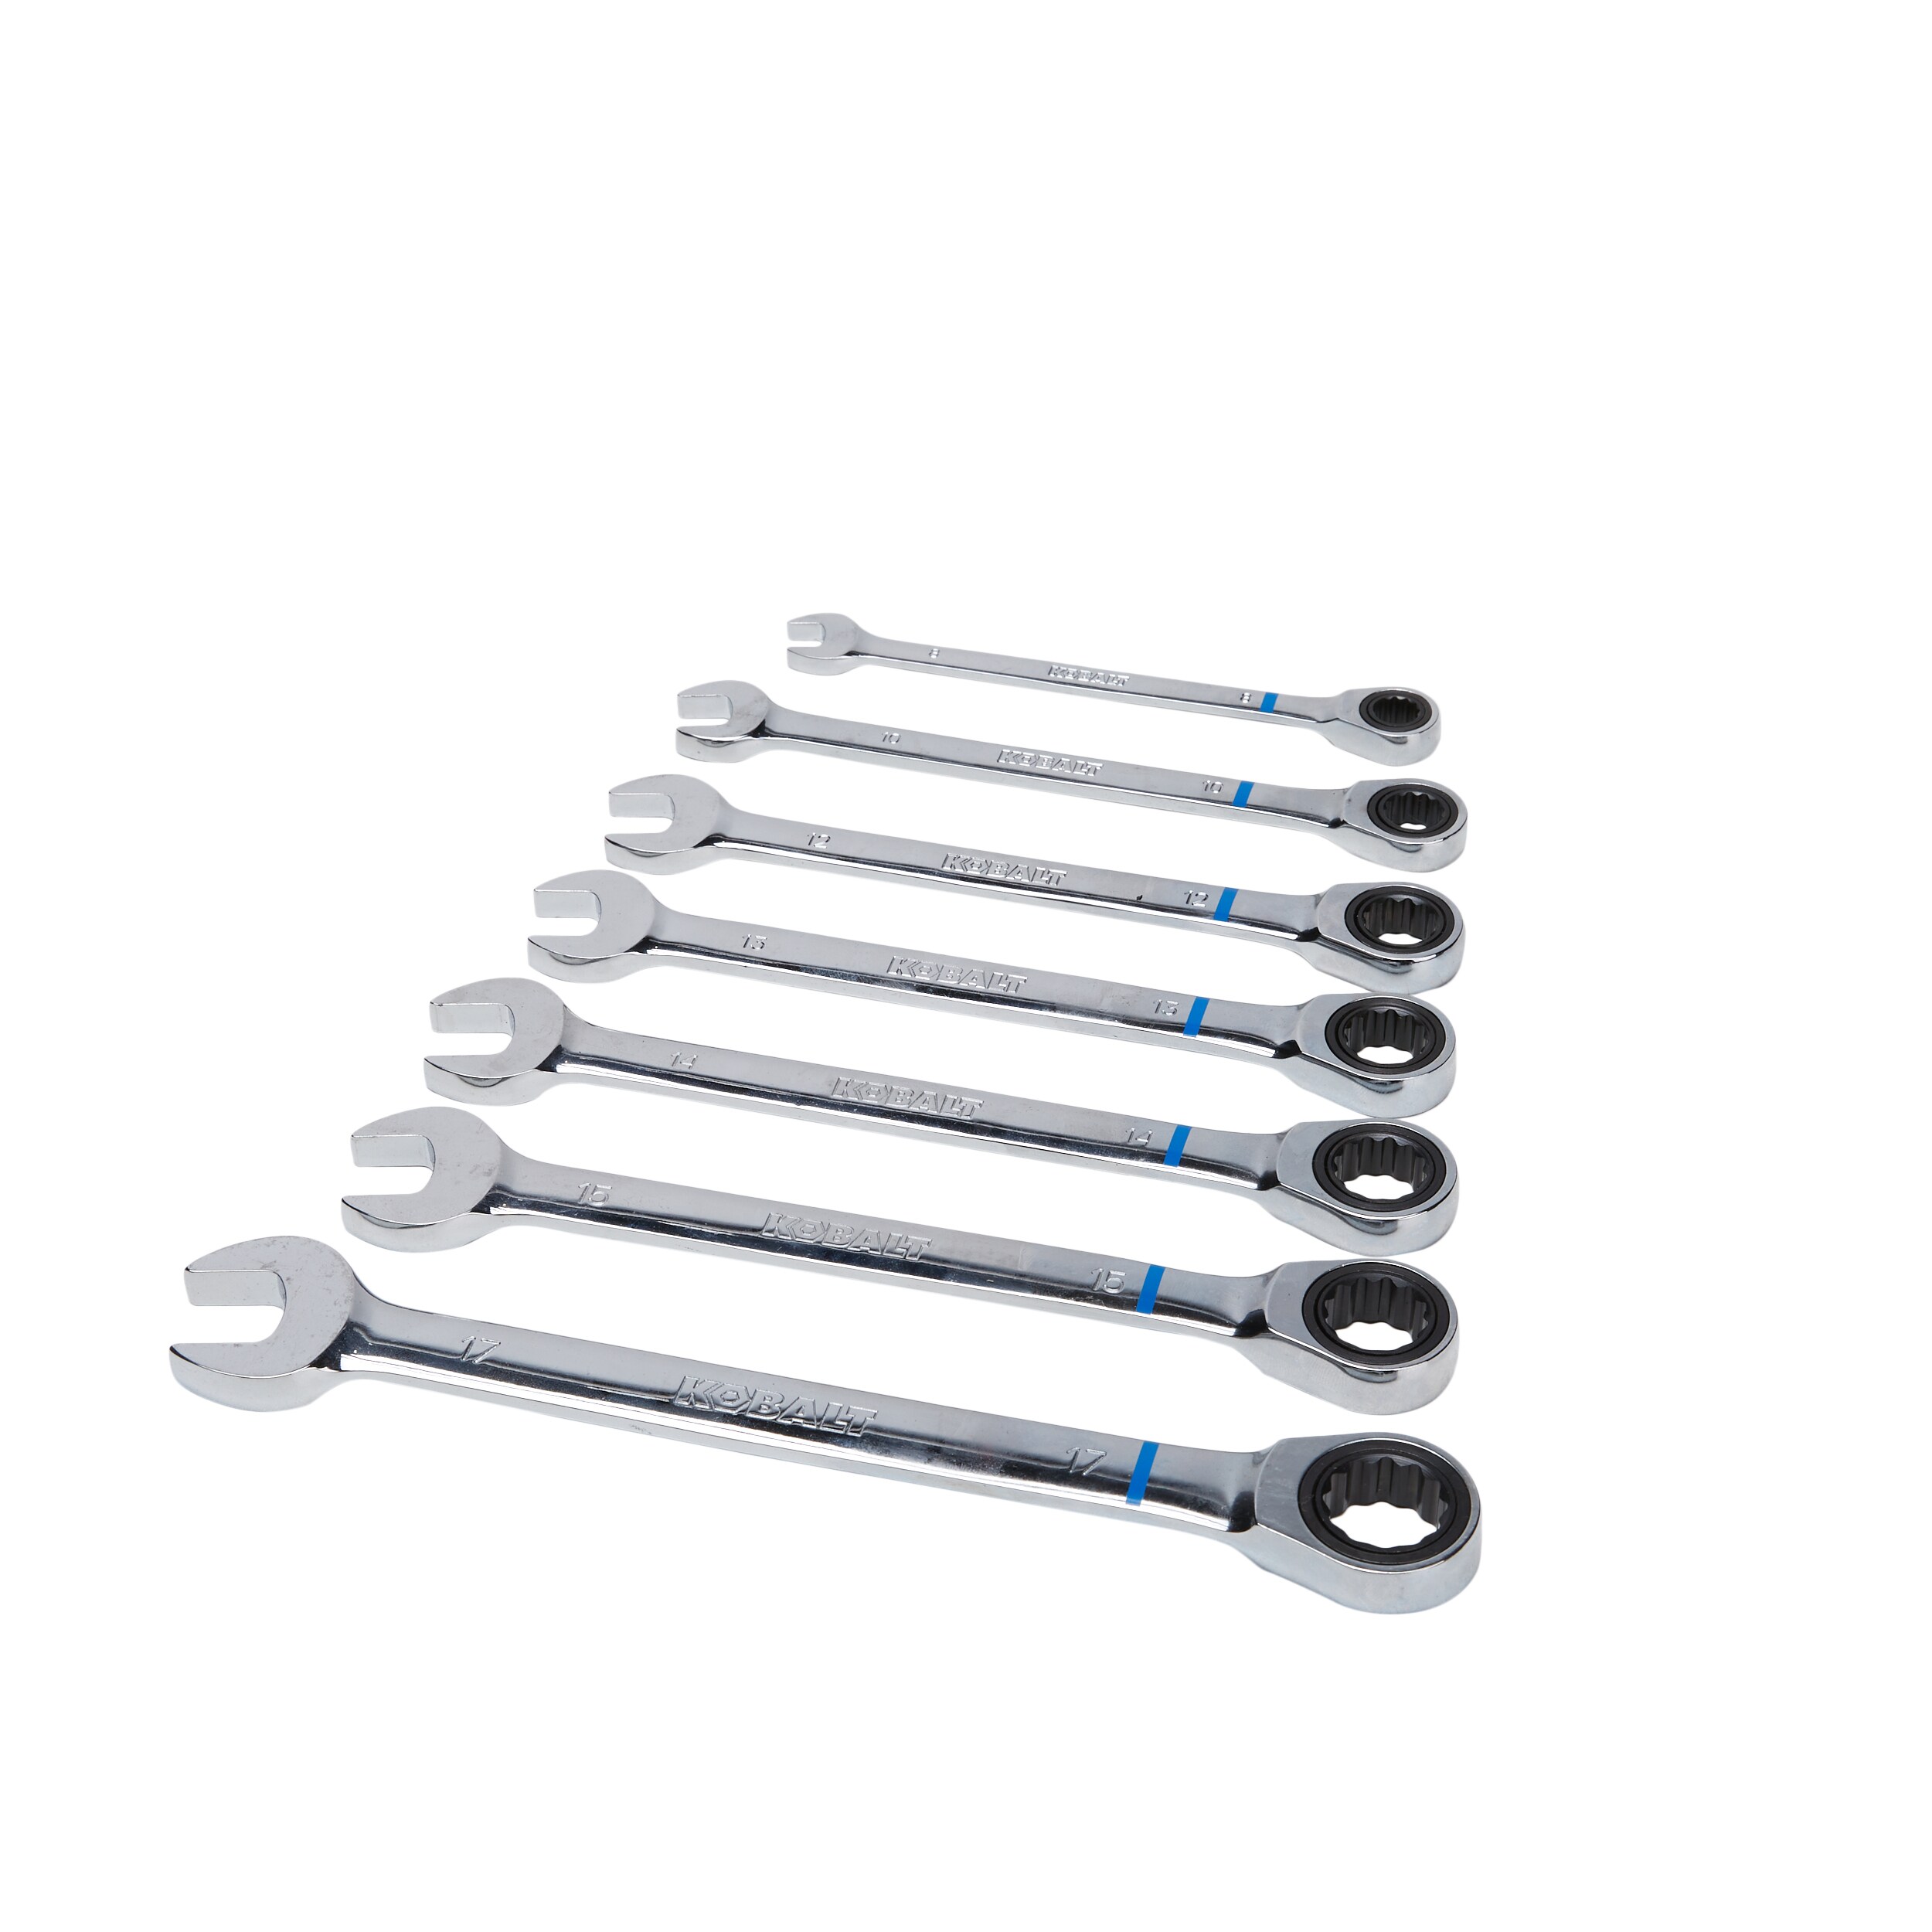 Kobalt 7-Piece Set 12-Point Metric Ratchet Wrench Set in the 